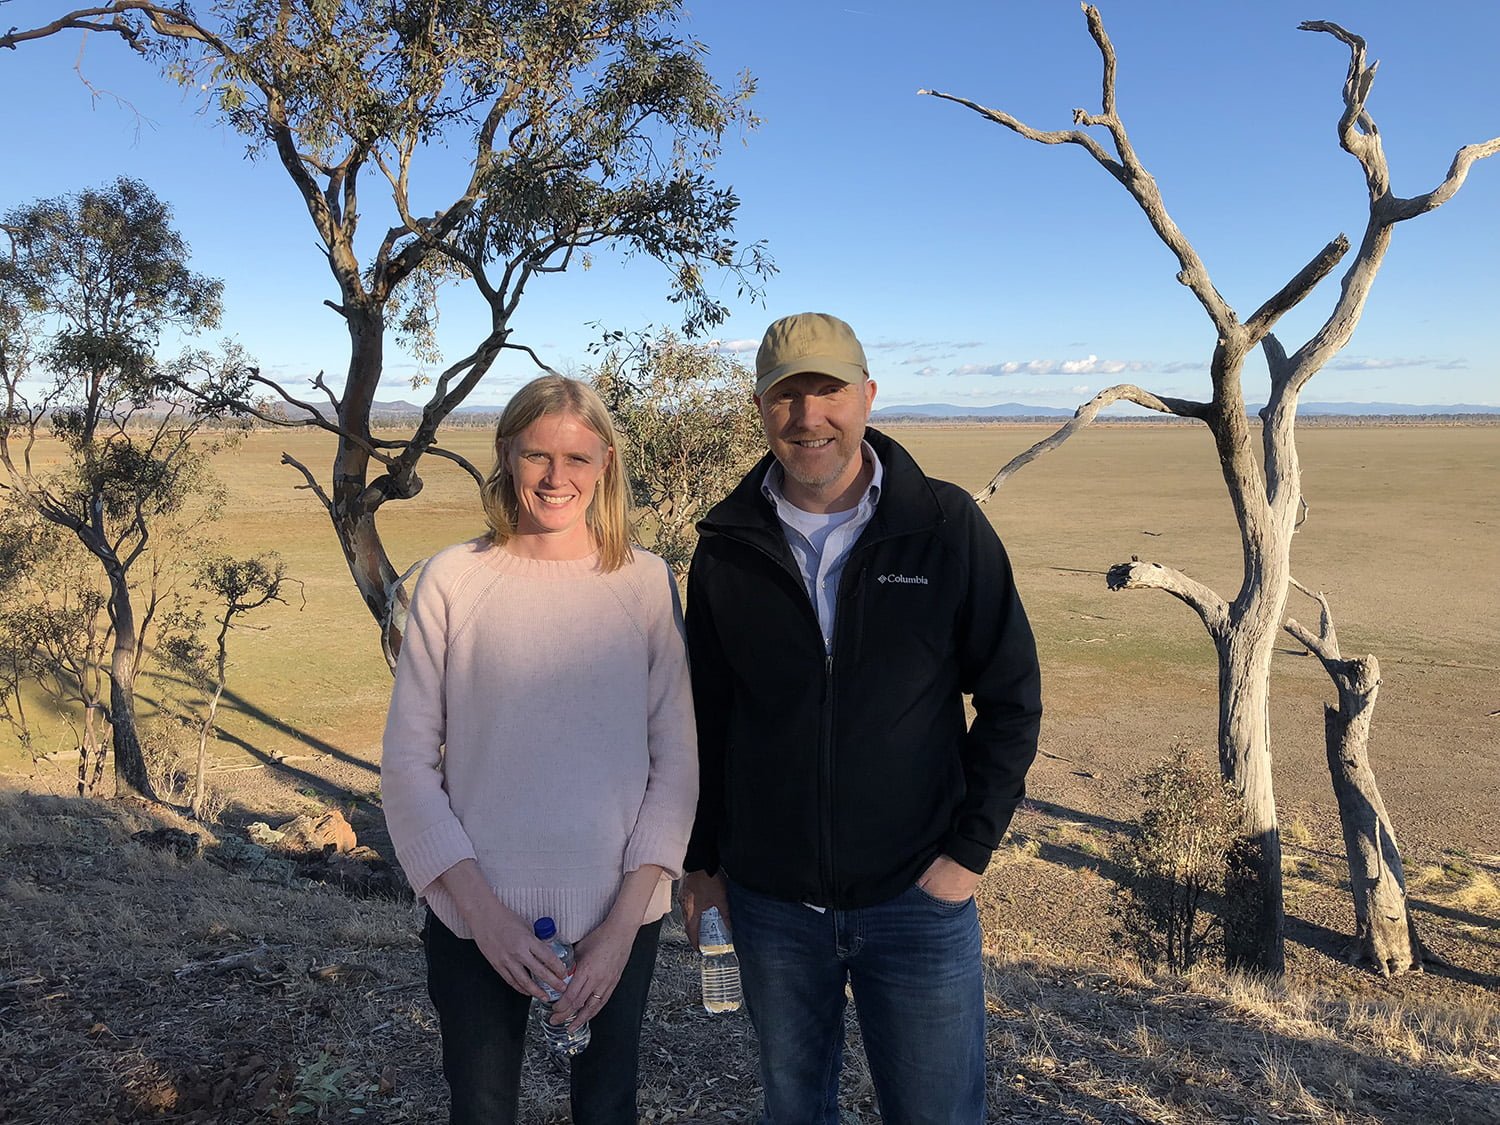 Trent and Jenny at the 2nd Twinning Workshop at the Winton Wetlands (4 June 2018). Photo credit: Tamara Boyd